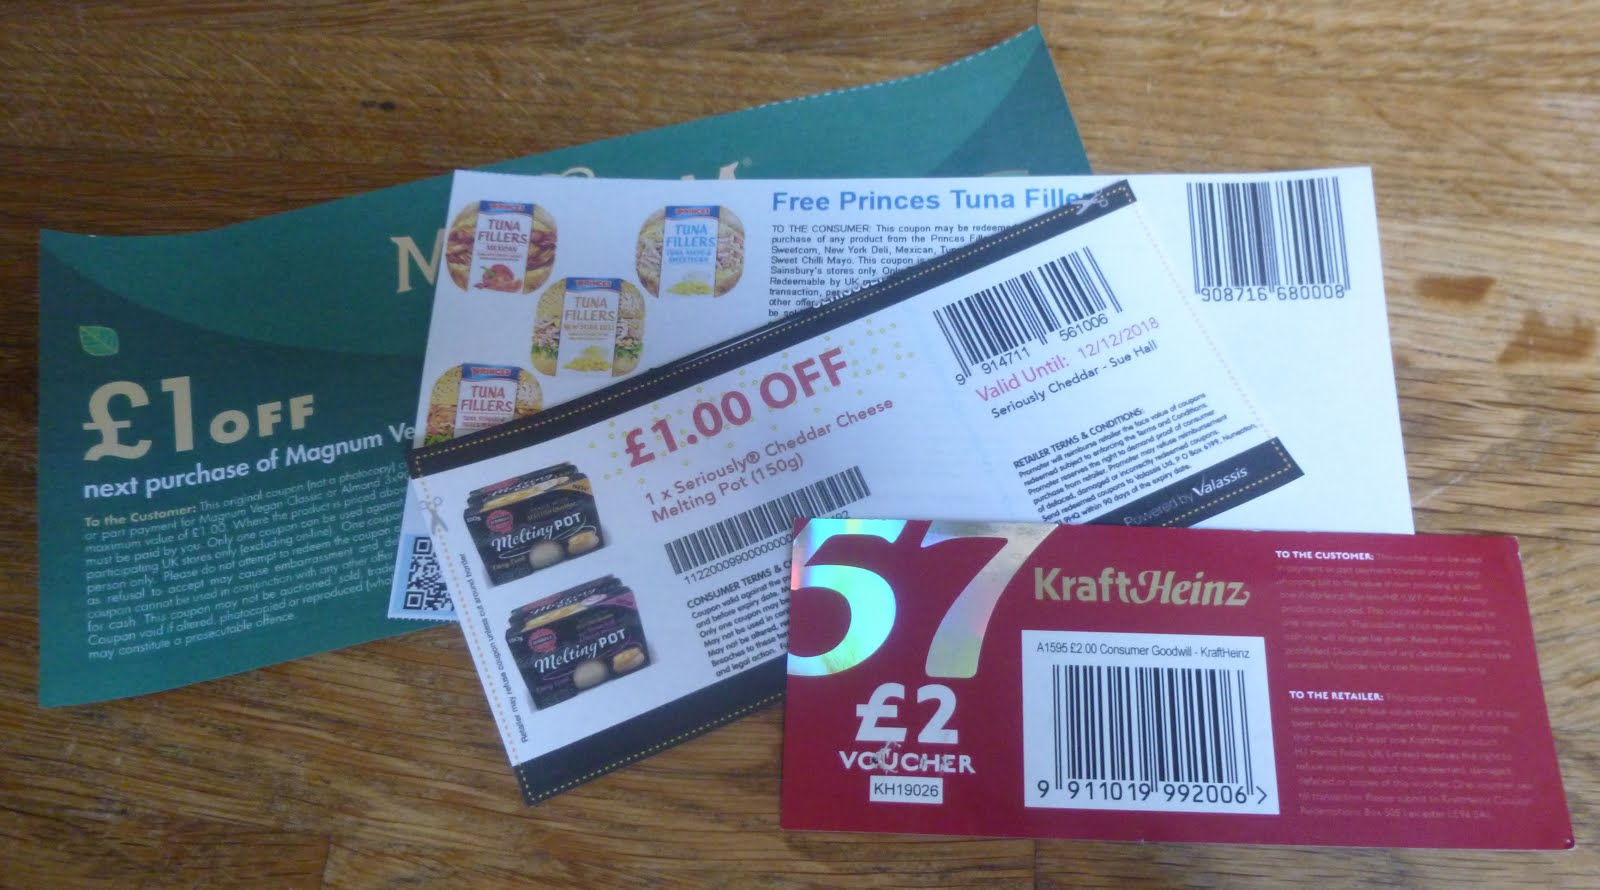 Challenge Three - Freebies, Vouchers and Coupons